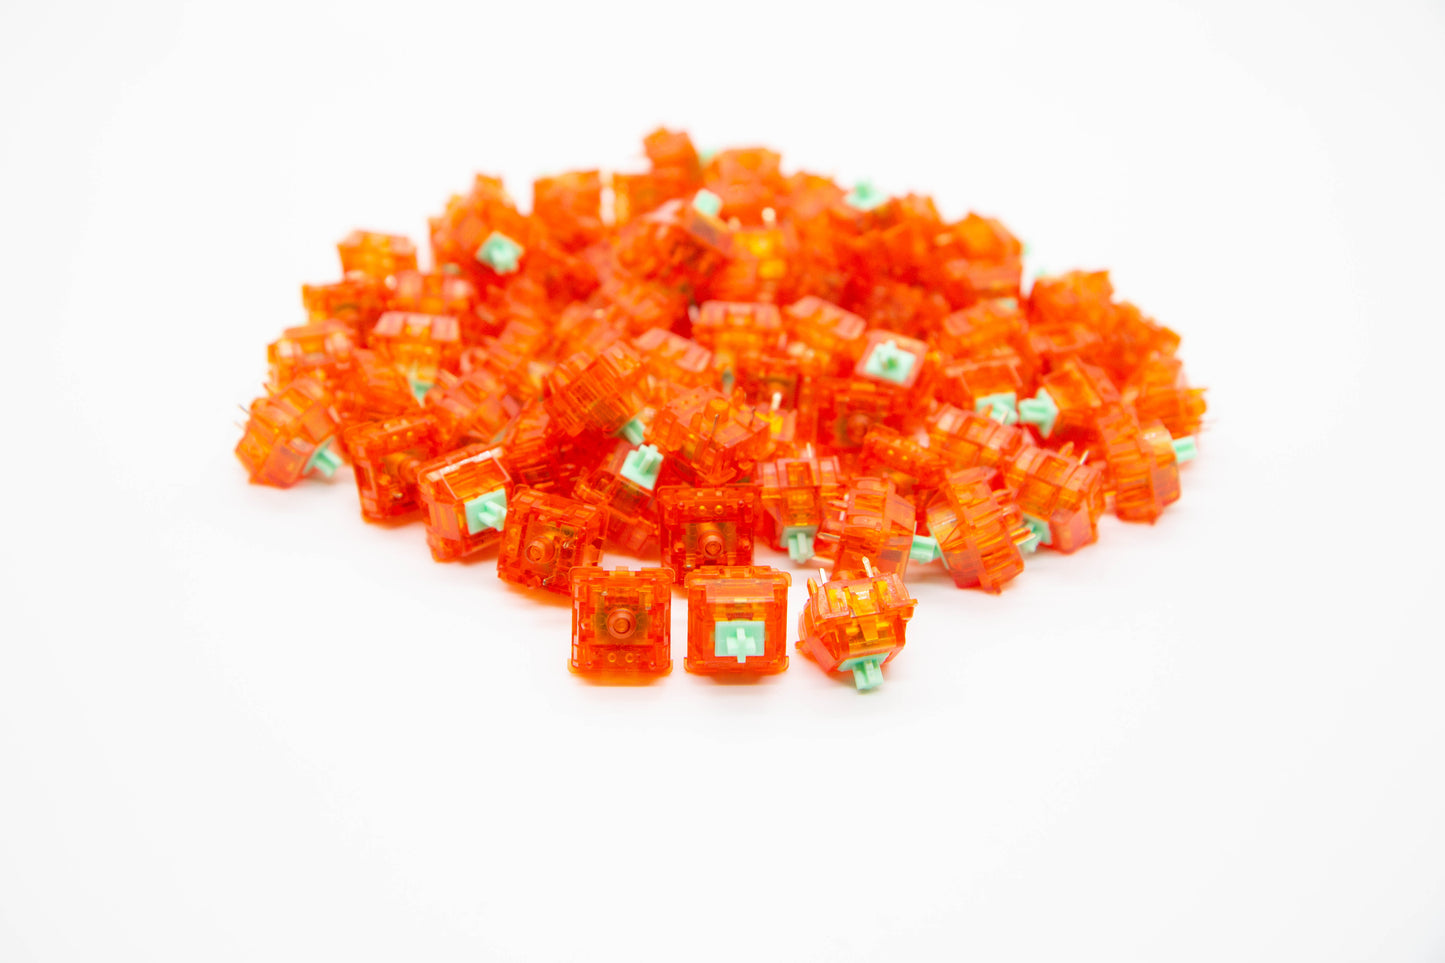 Close up shot of a pile Tangerine mechanical keyboard switches featuring orange semi-transparent housing and light green stems